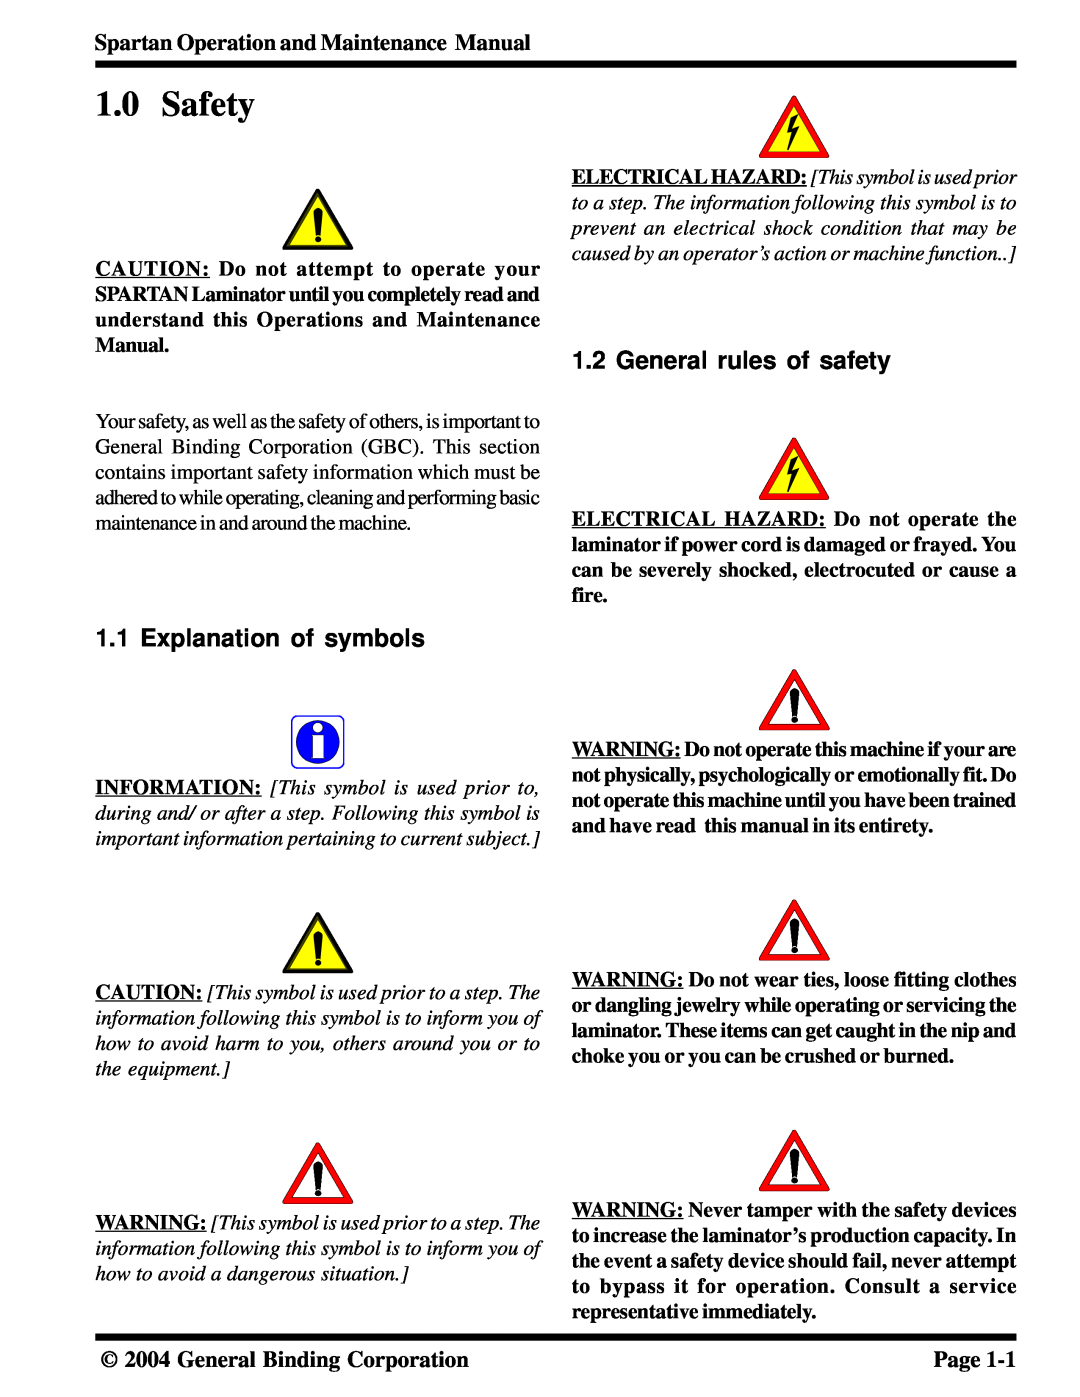 GBC 930-073 manual Safety, General rules of safety, Explanation of symbols 